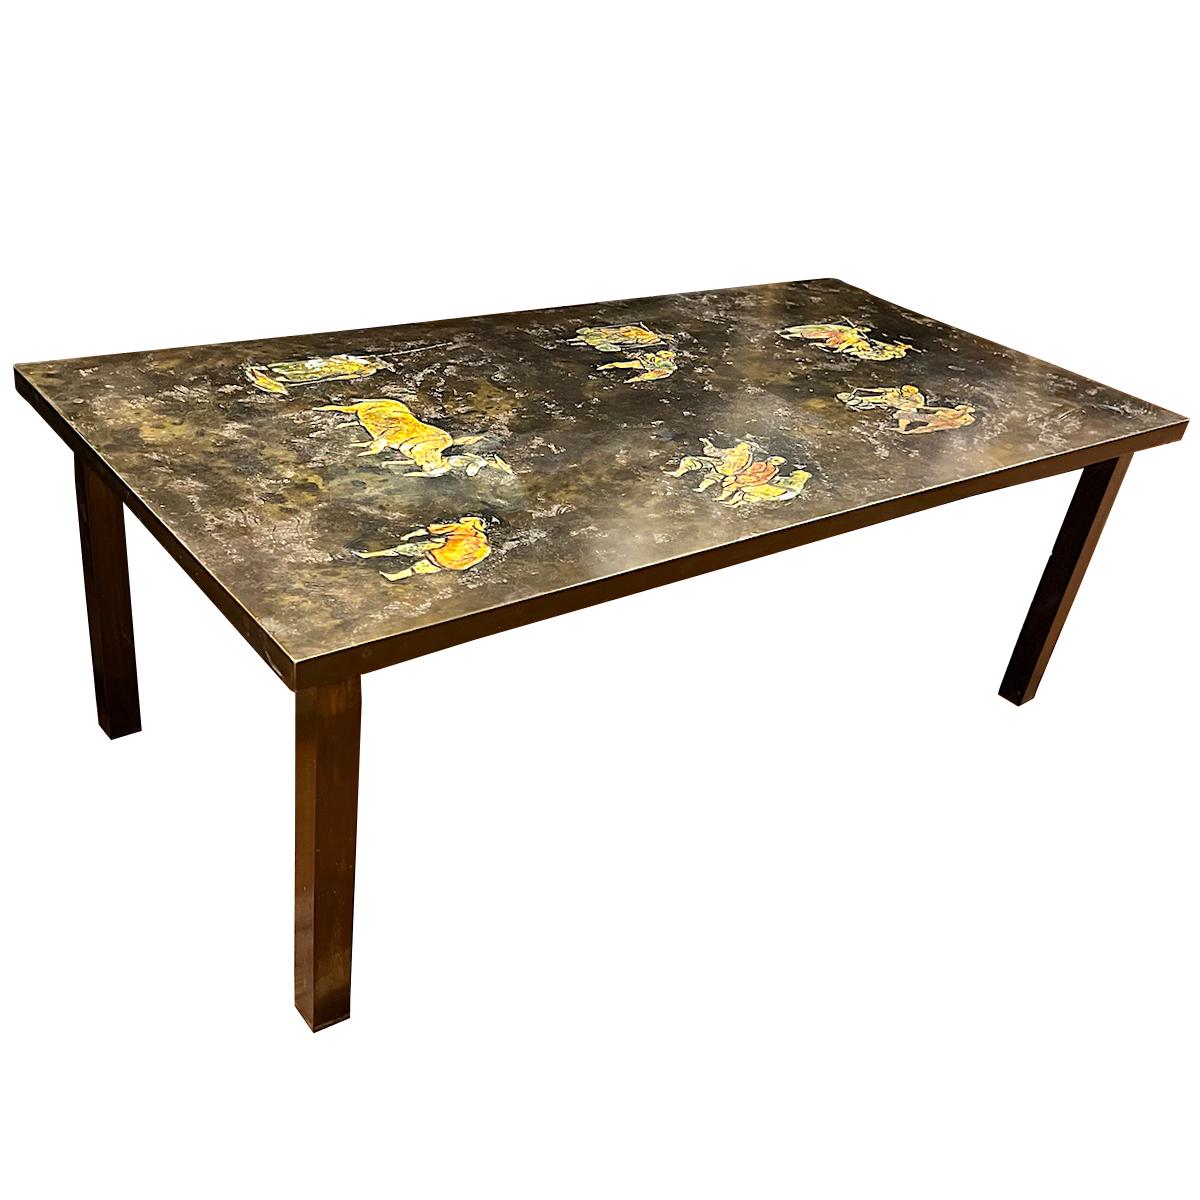 A circa 1970s LaVerne coffee table with painted scenes.

Measurements:
Height:17